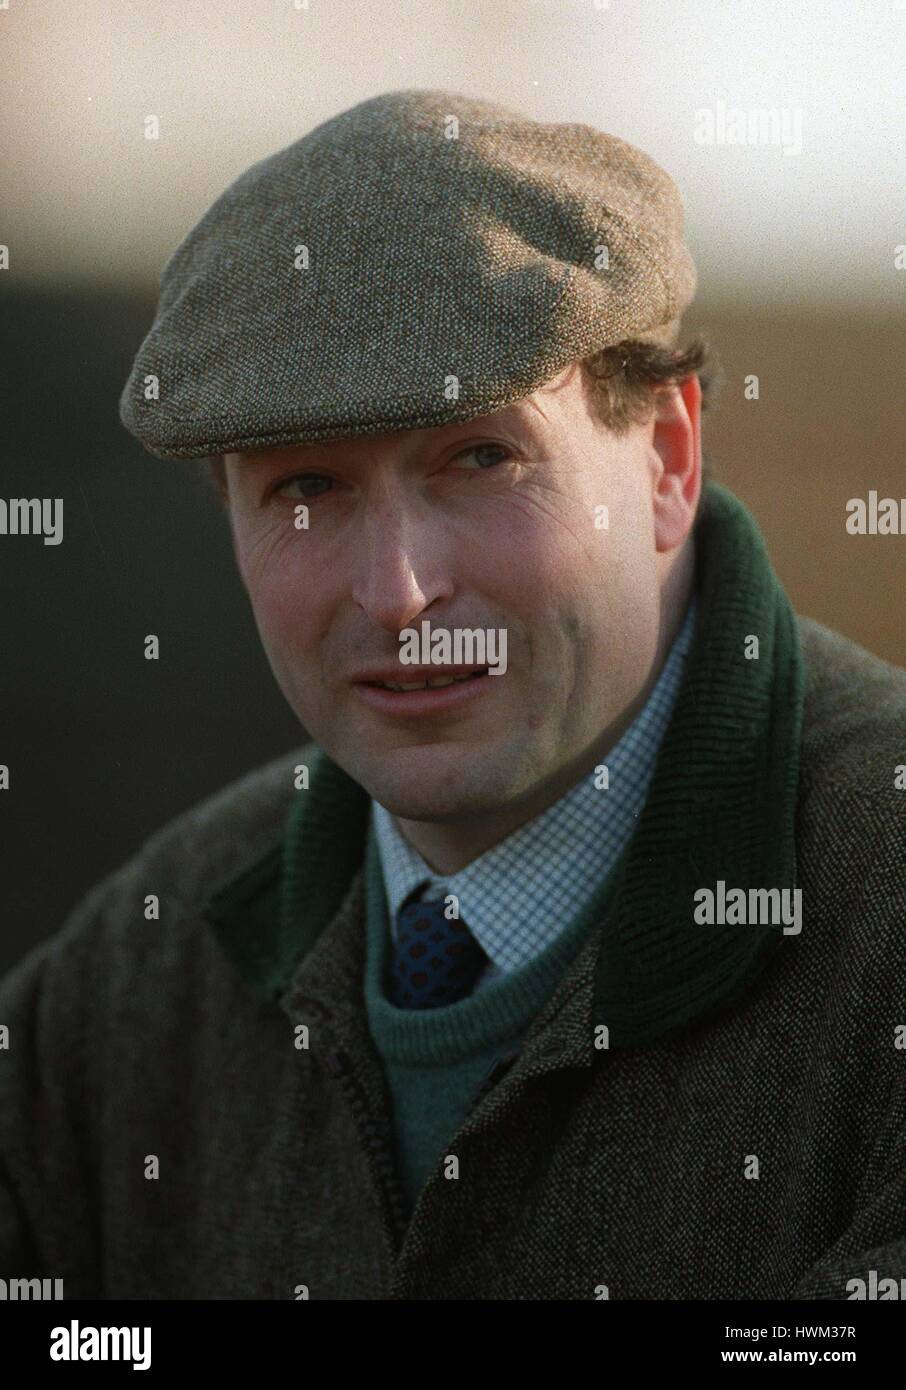 W.A.BETHEL RACEHORSE TRAINER 03 April 1996 Stock Photo